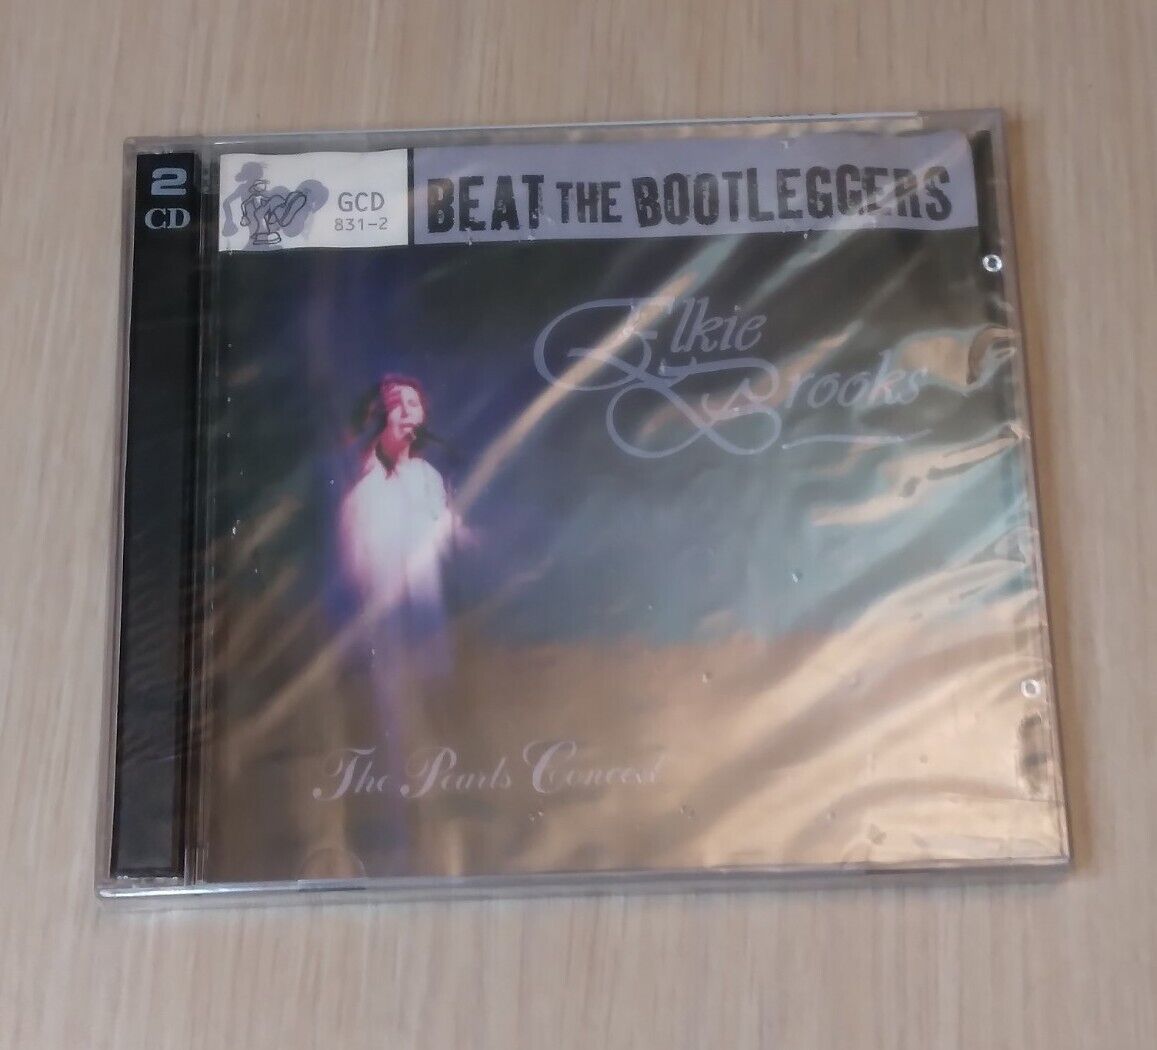 ELKIE BROOKS - Pearls Concert  Beat the Bootleggers - 2 CD  Brand New Sealed 